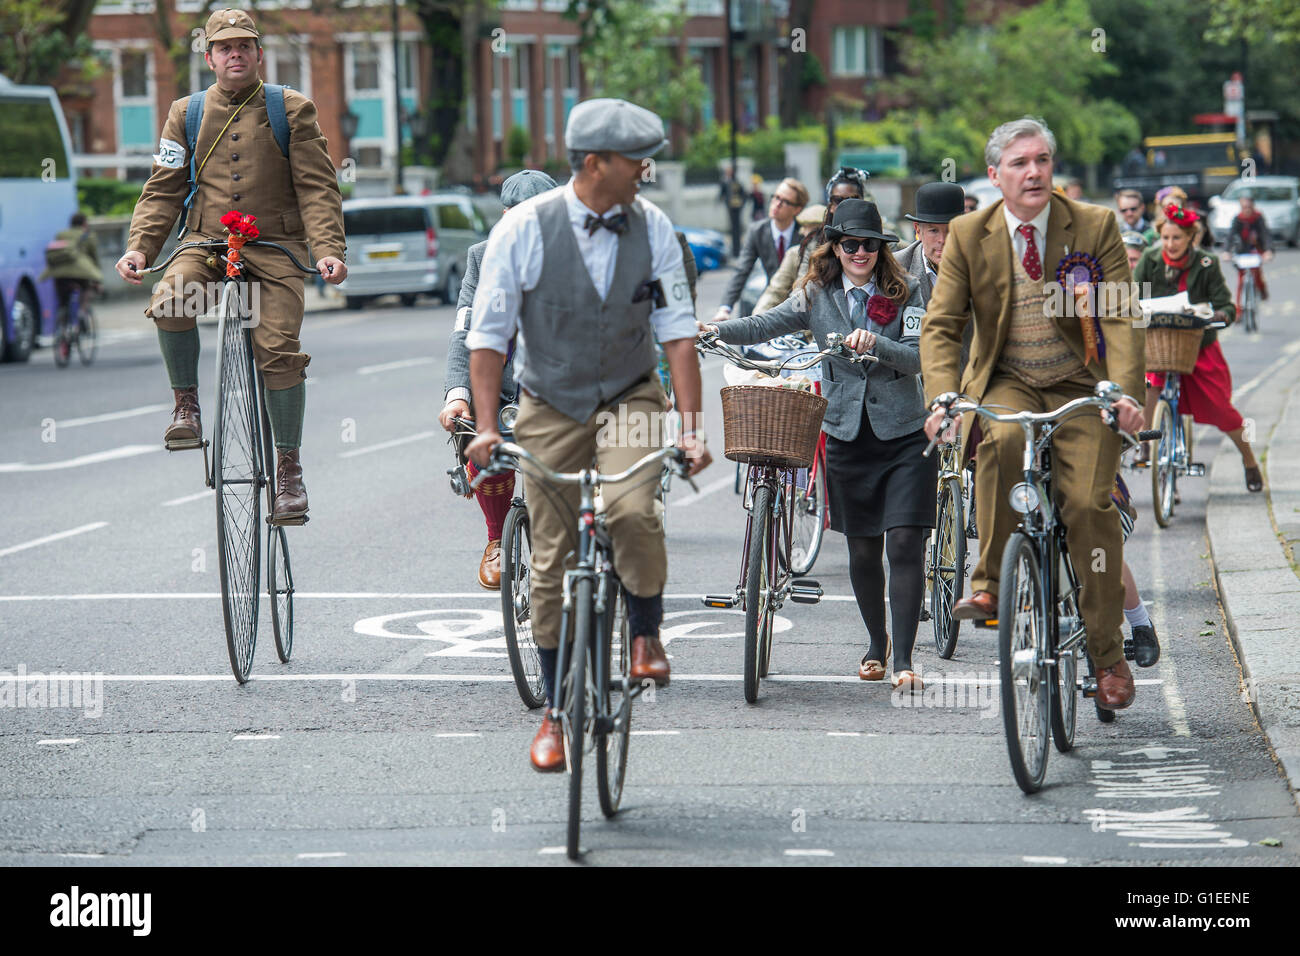 London, UK. 14th May, 2016. Arriving for the lunch break at Hyde Park - The Tweed Run, a very British public bicycle ride through London’s streets, with a prerequisite that participants are dressed in their best tweed cycling attire. Now in it's 8th year the ride follows a circular route from Clerkenwell via the Albert Memorial, Buckinham Palace and Westminster. Credit:  Guy Bell/Alamy Live News Stock Photo